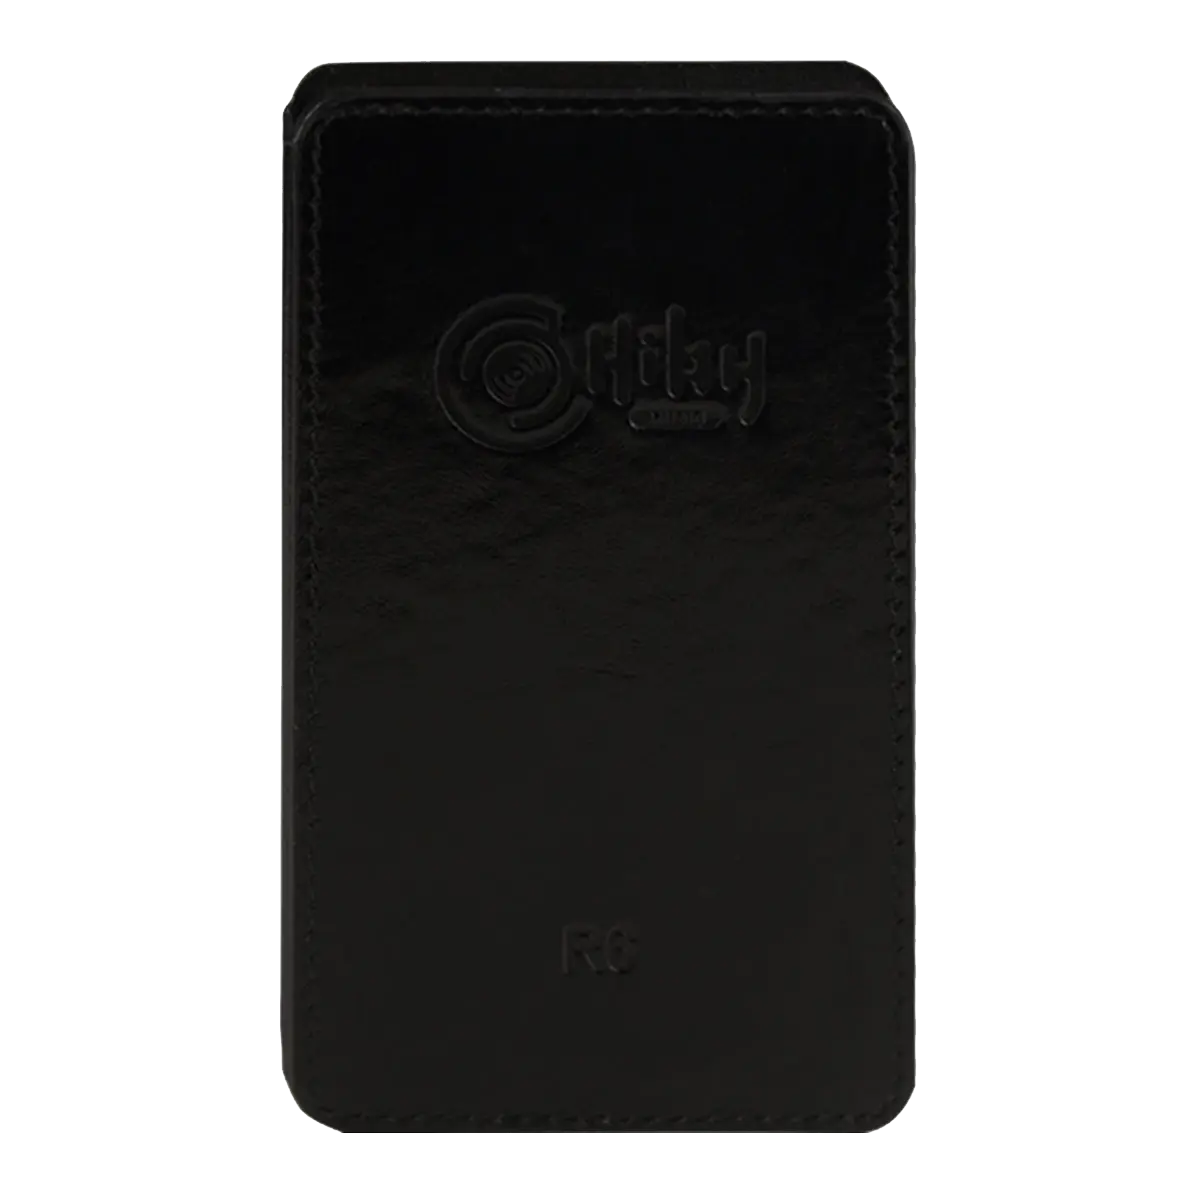 R6 Leather Case HiBy | Make Music More Musical